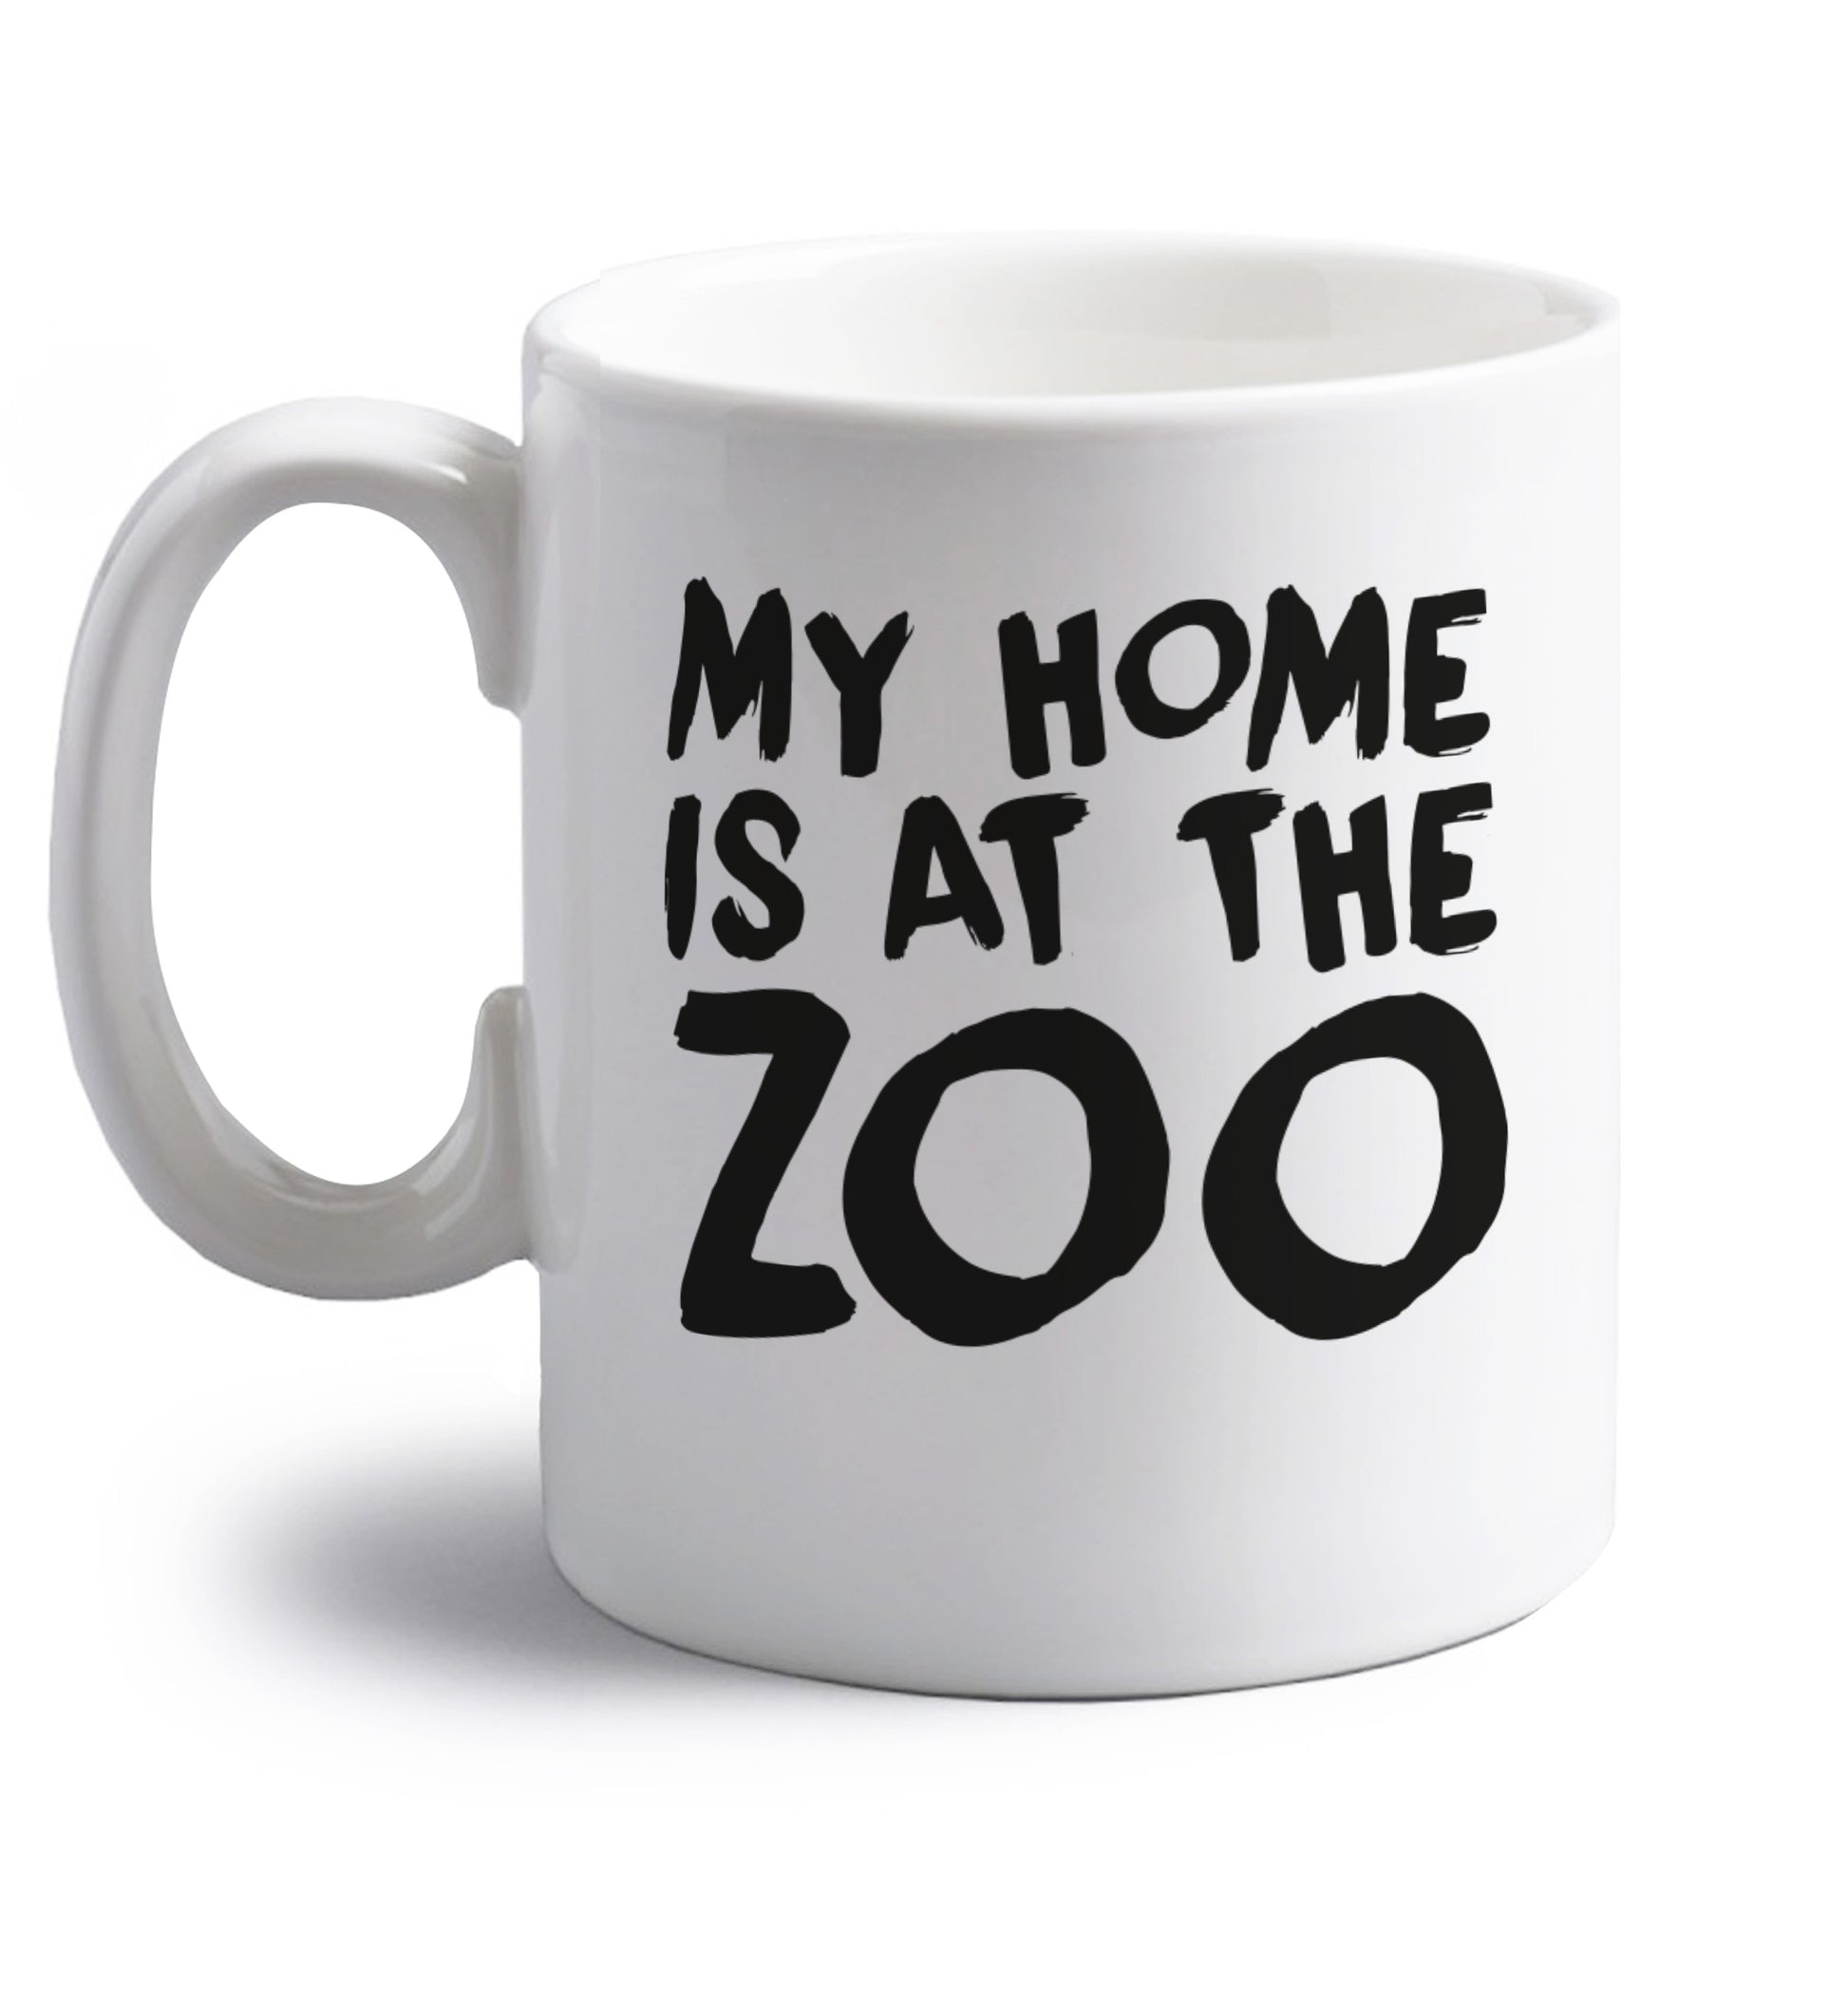 My home is at the zoo right handed white ceramic mug 